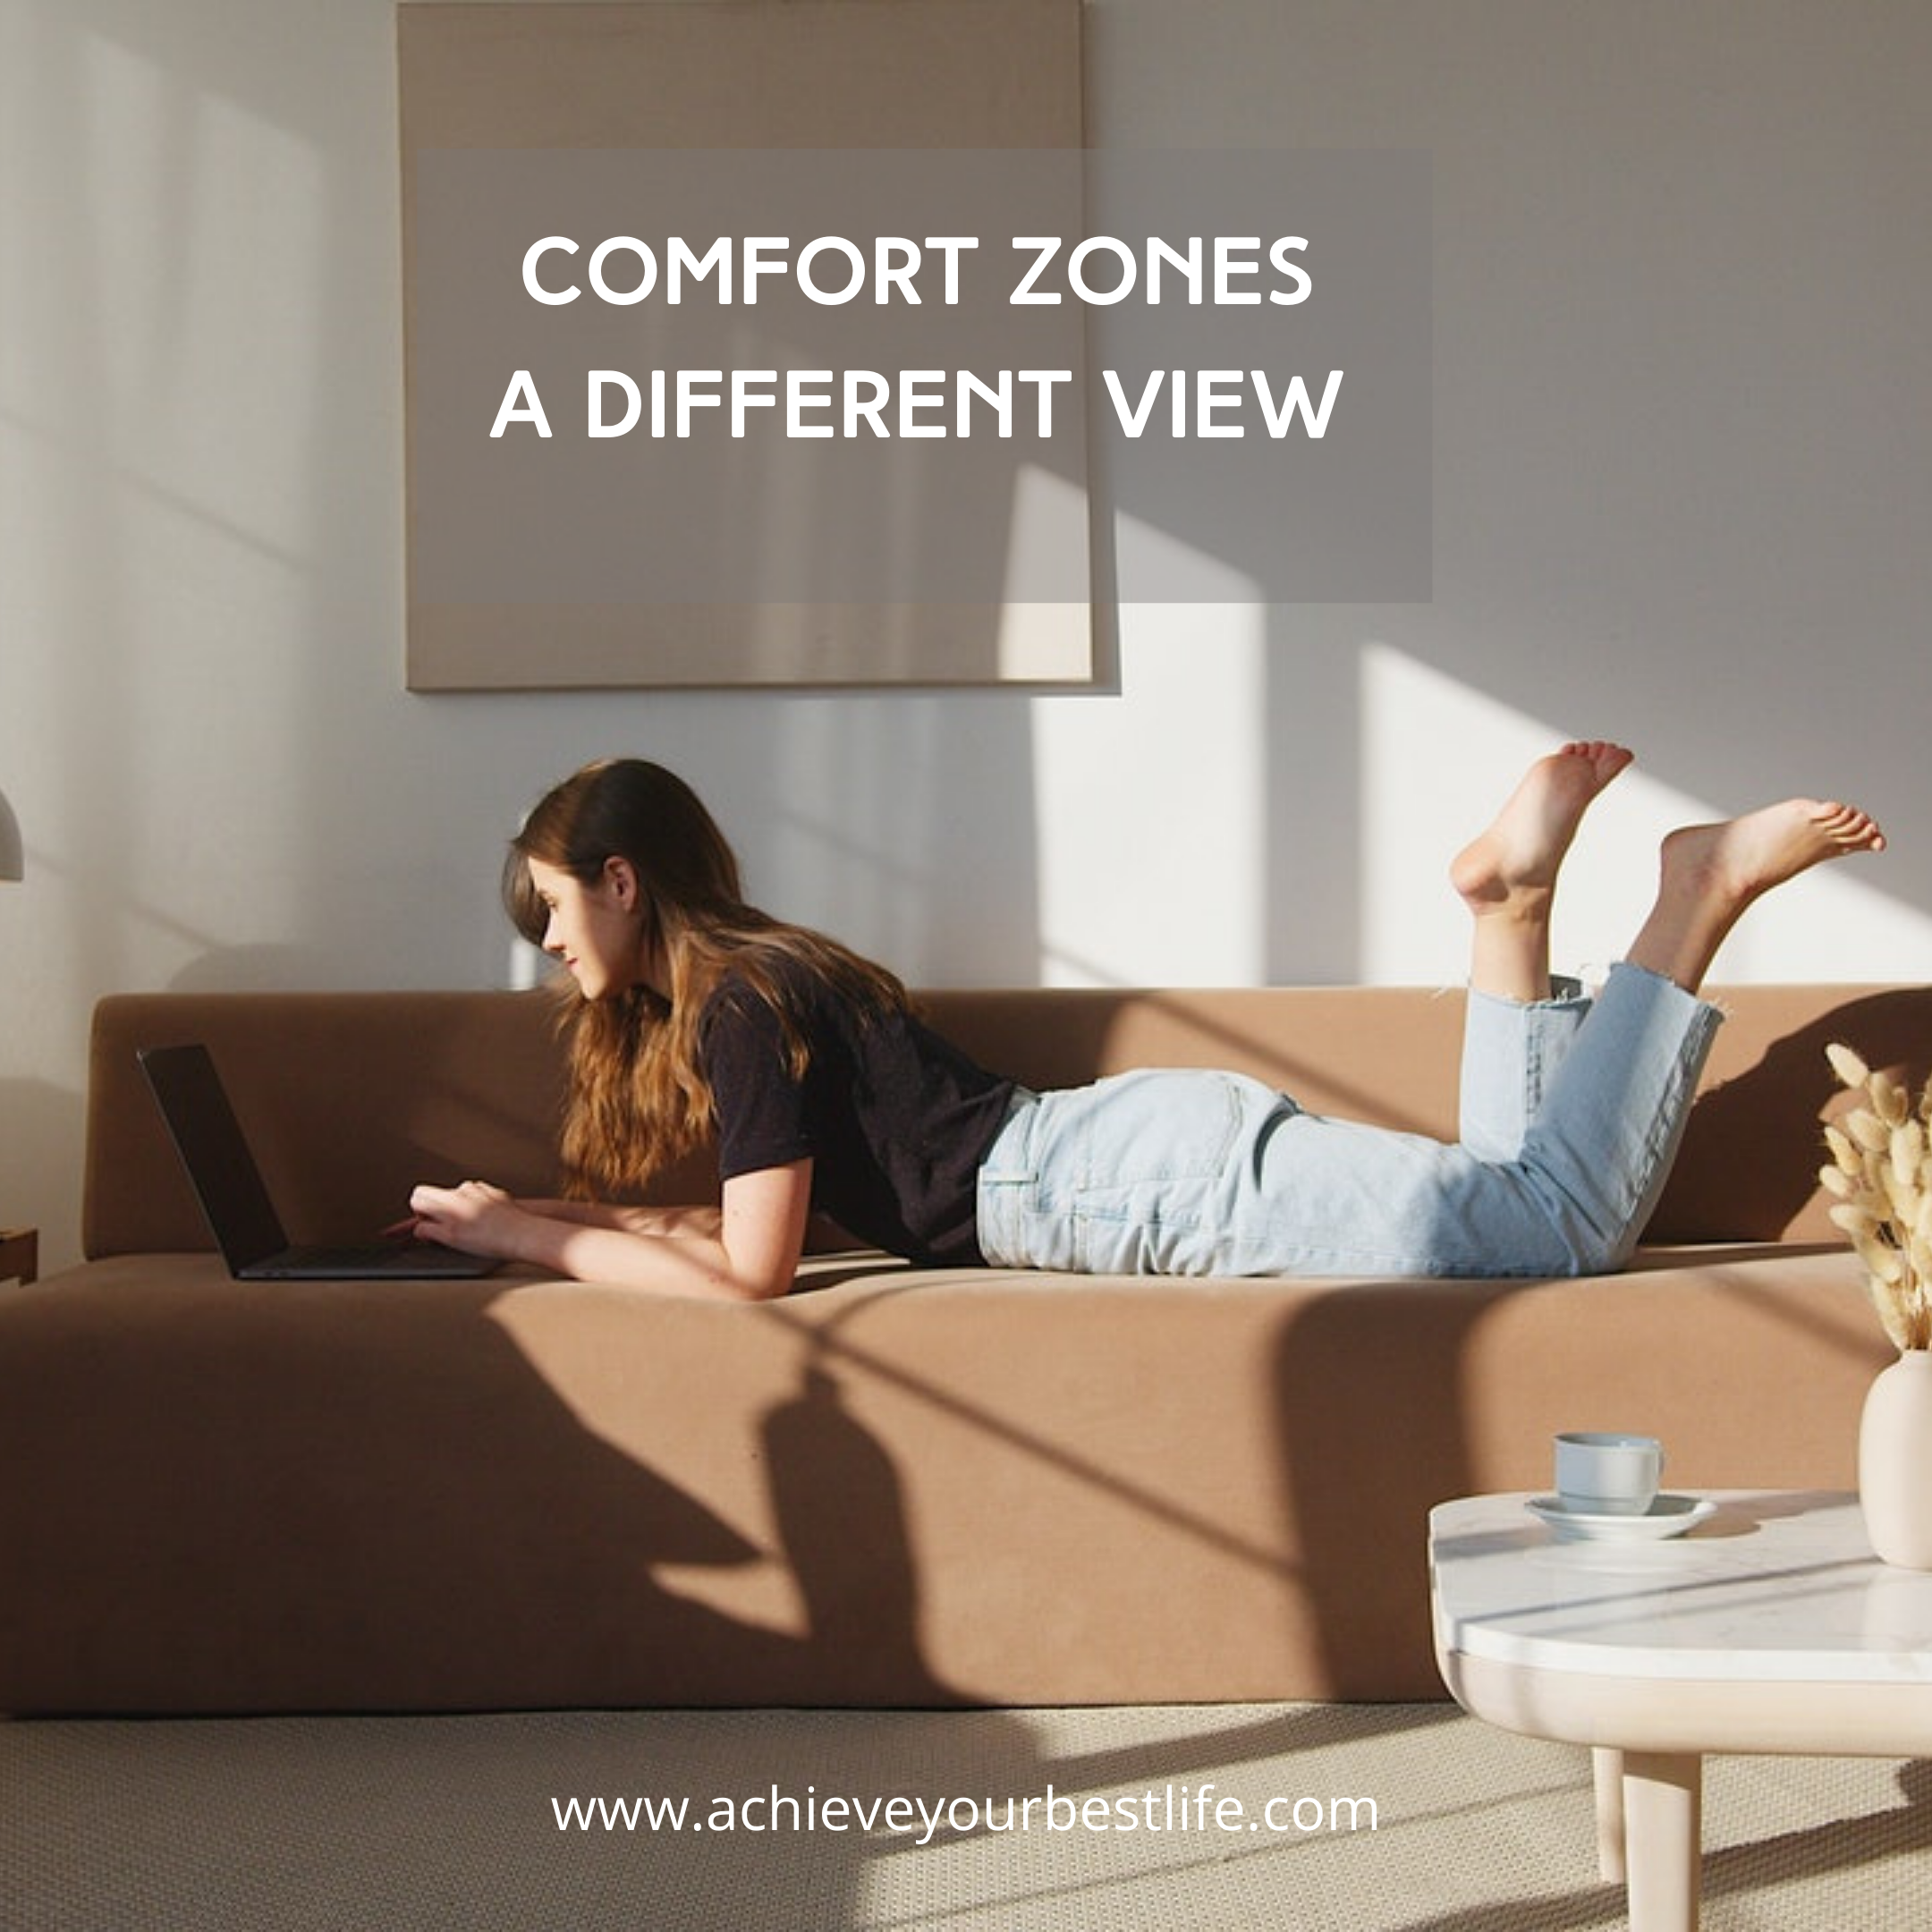 Comfort Zones – A Different View